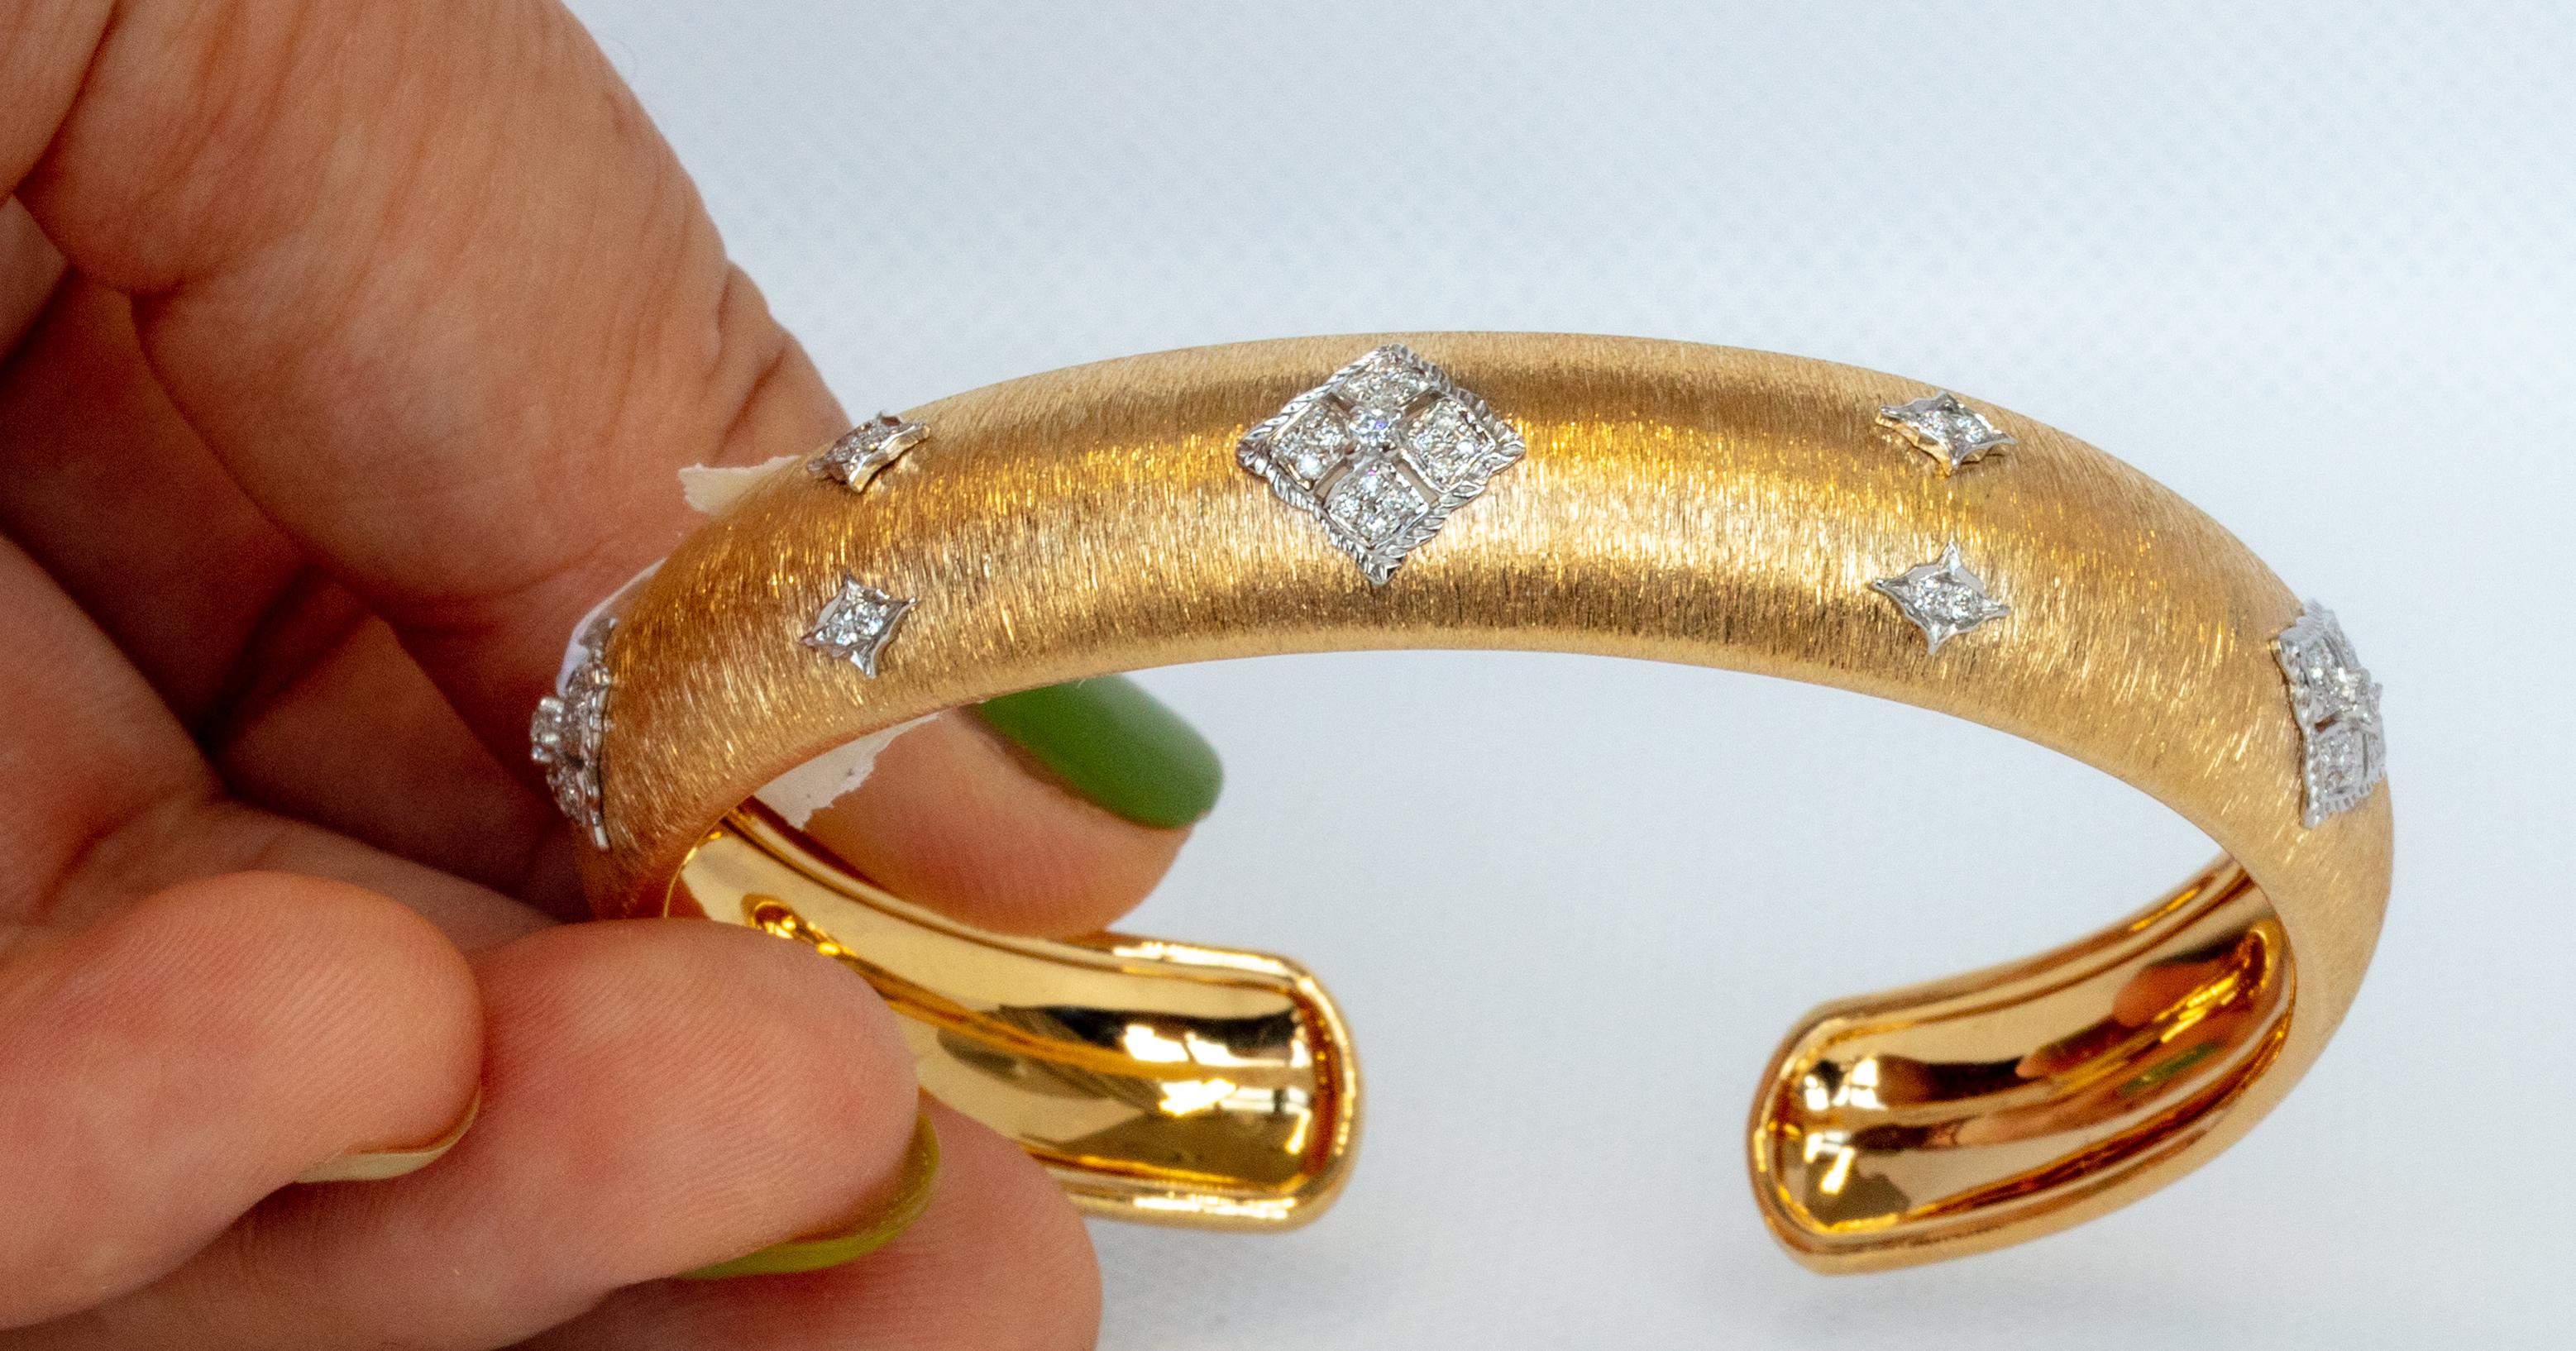 18K YELLOW AND WHITE GOLD DIAMONDS BANGLE in Florentine Finish 
59 ROUND DIAMONDS - 0.24cts
18 KWY - 14.25gm
Size 48x58 MM

This item is currently in making. The lead time is 4-8 weeks. Please let us know your wrist size so we can do it custom made.